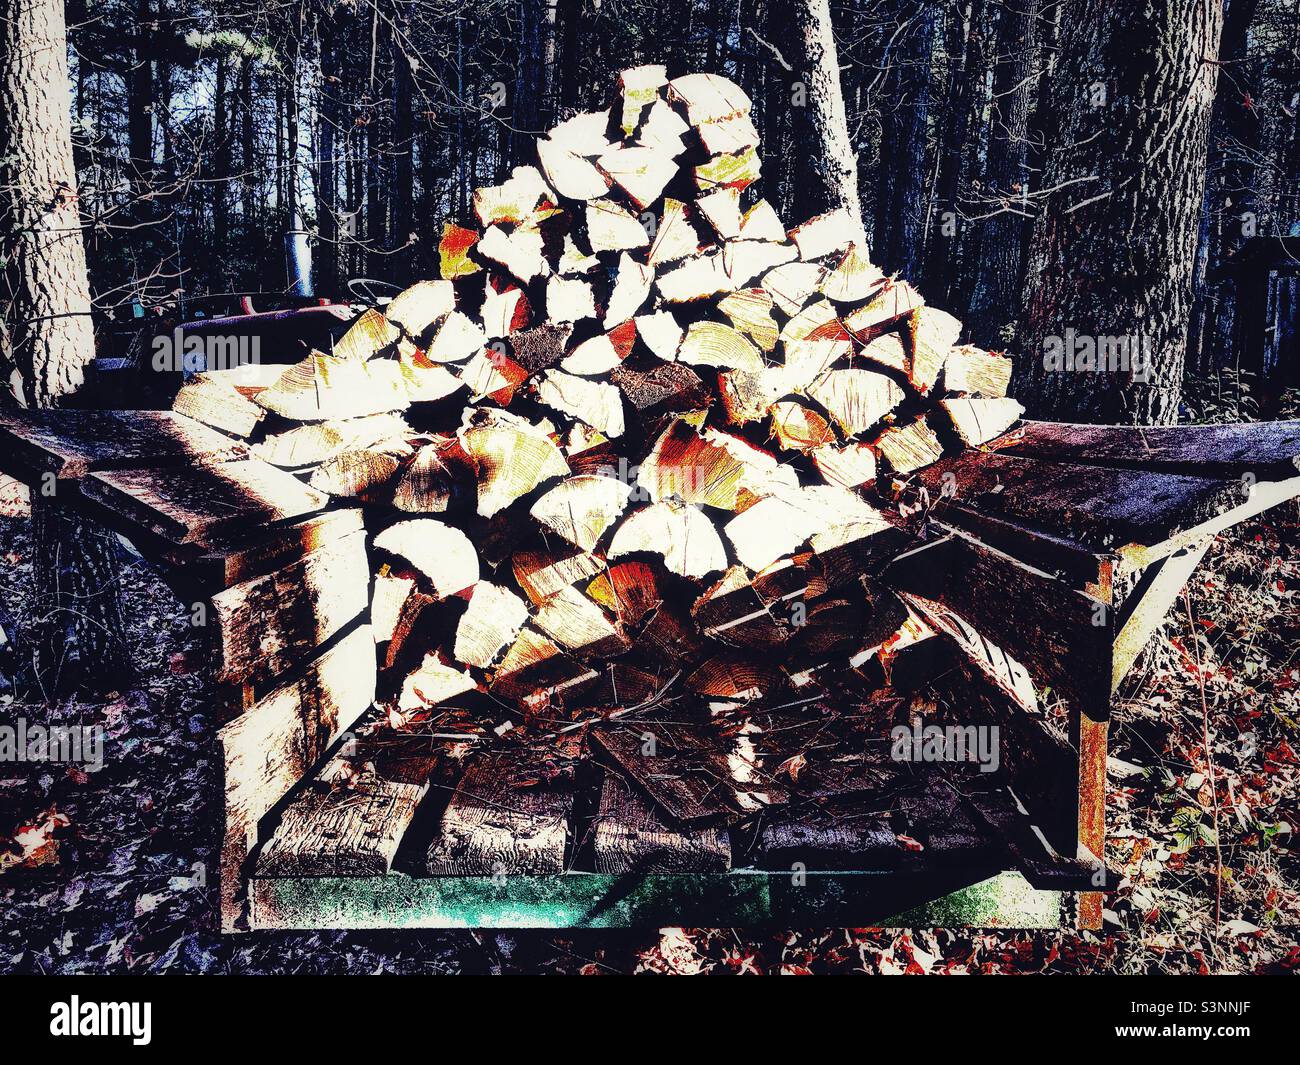 Wooden trailer stacked with firewood Stock Photo